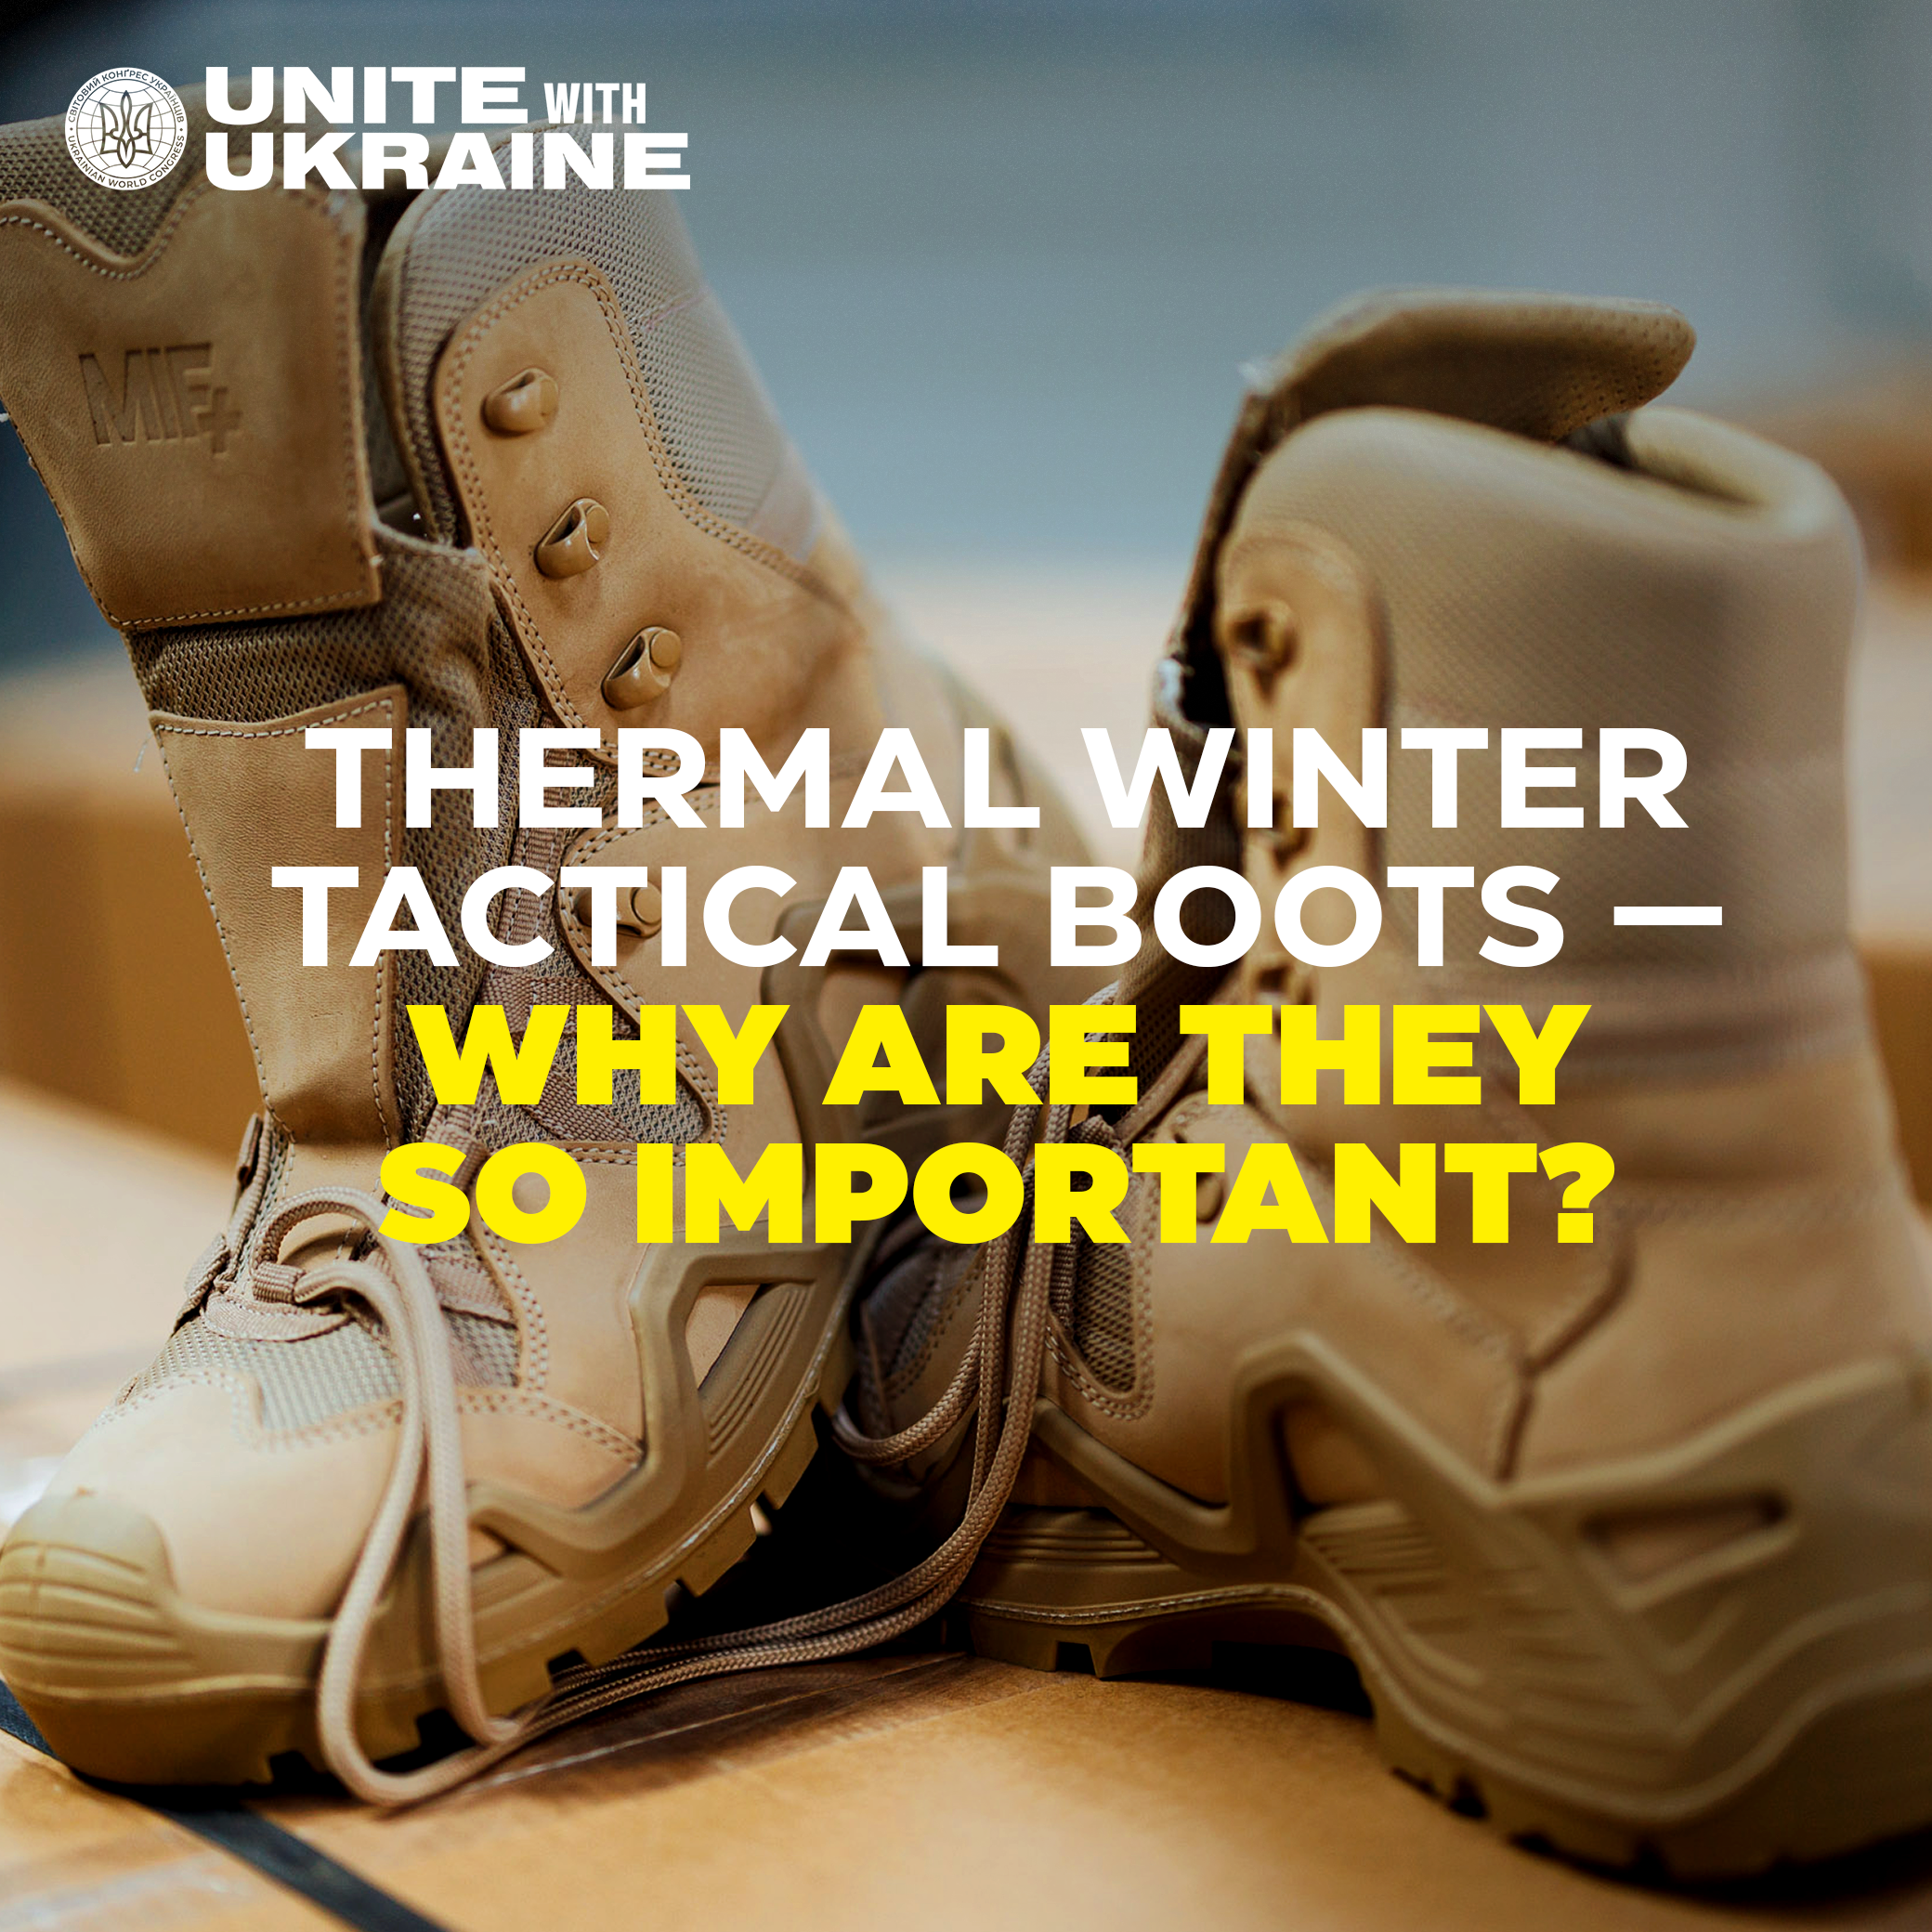 Thermal Winter Tactical Boots — why are they so important?